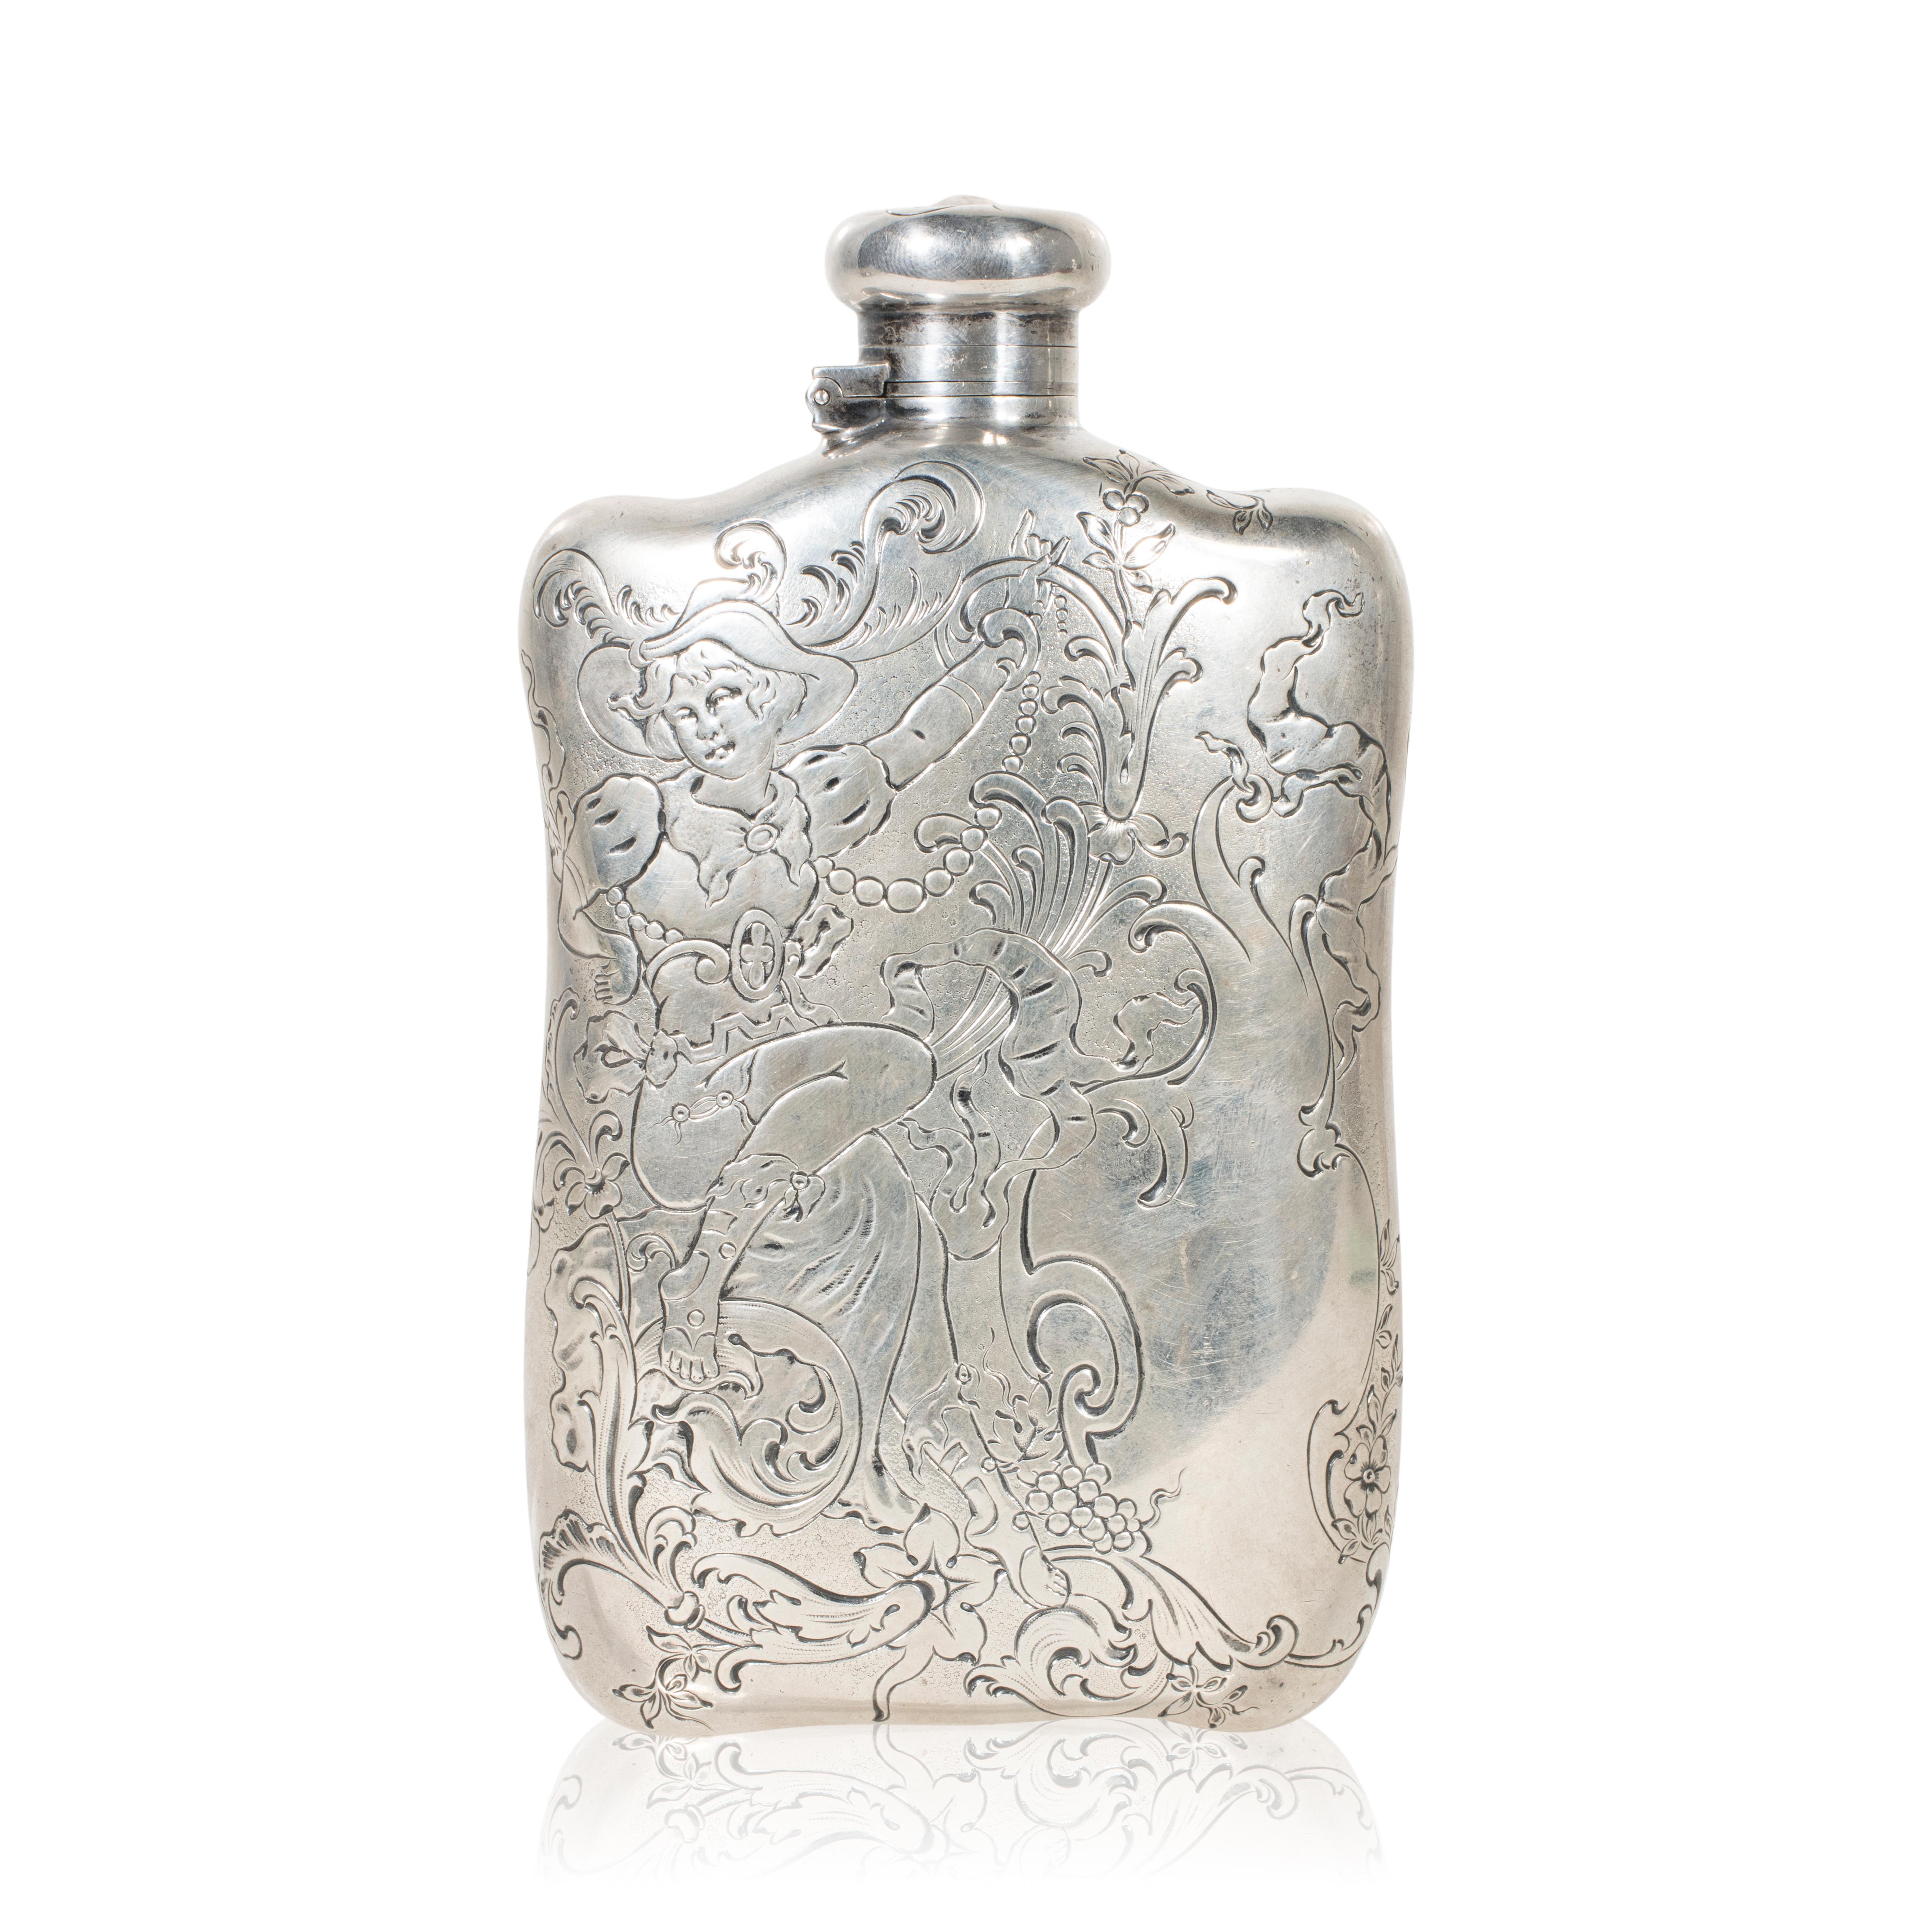 Tiffany & Co. sterling silver flask. Engraved with a portrait of a young woman in fashionable dress resting among foliate sprays. New York, Circa 1891 - 1902. 5 3/4